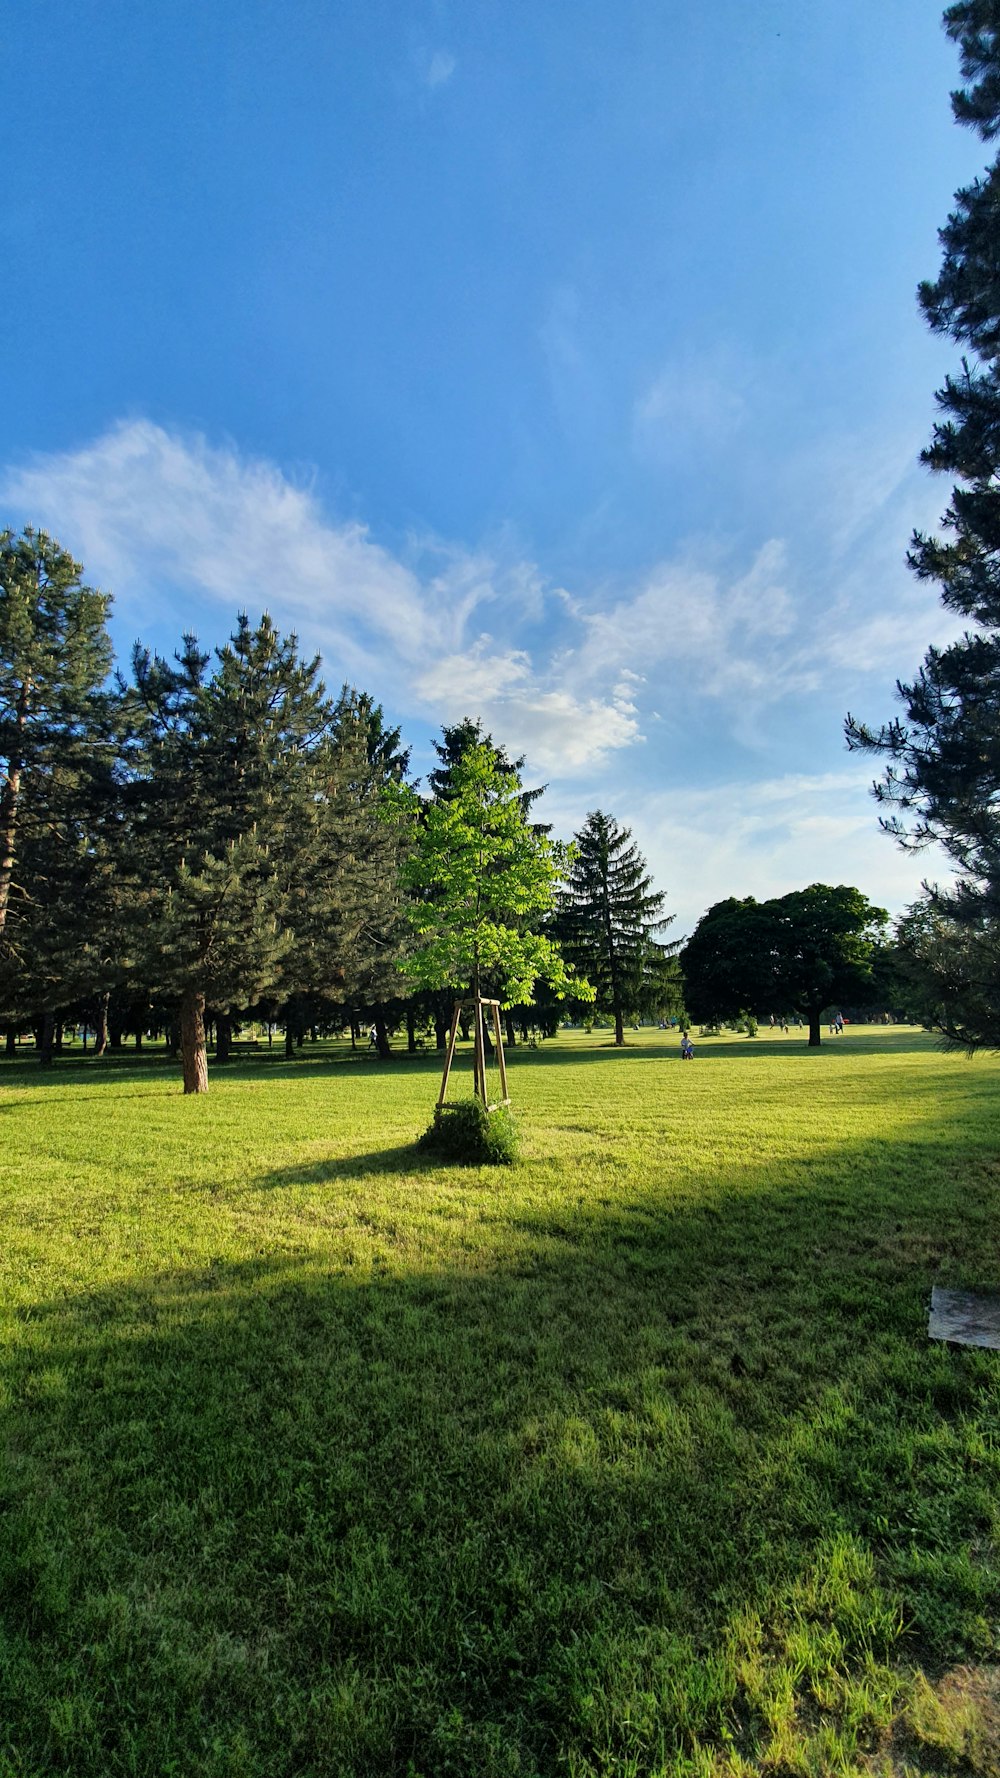 a grassy field with trees and a bench